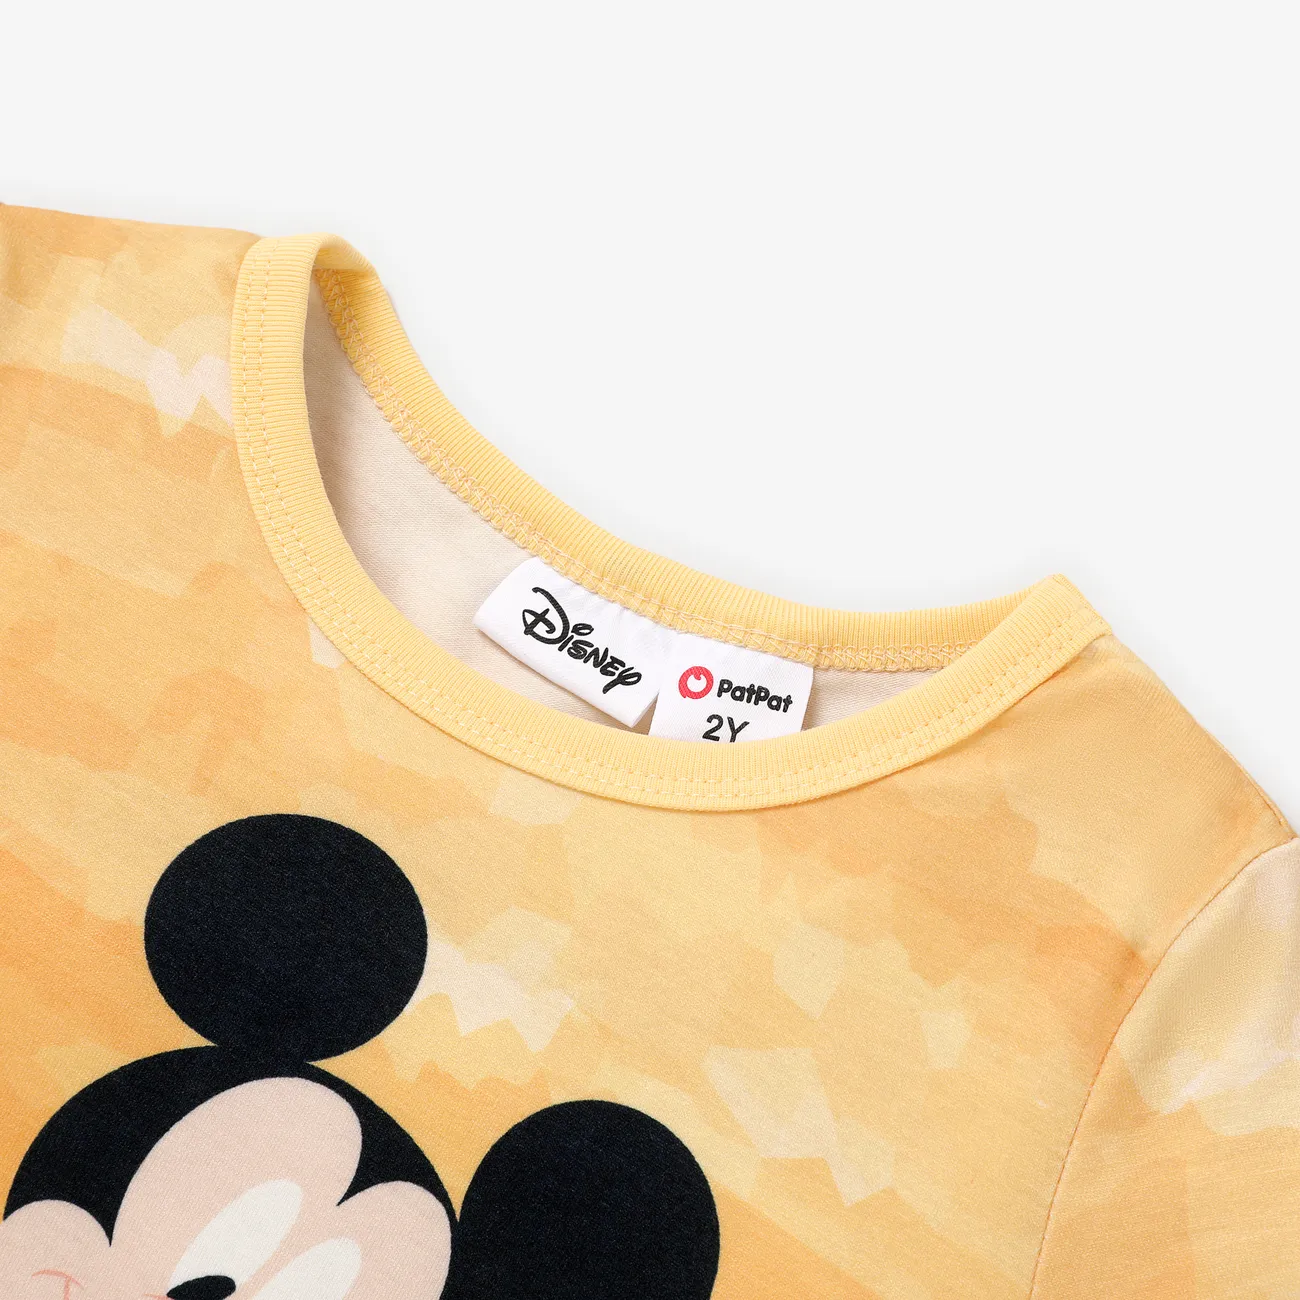 Easter Disney Mickey and Friends Toddler Girl/Boy Tyedyed Colorful T-shirt
 Color block big image 1